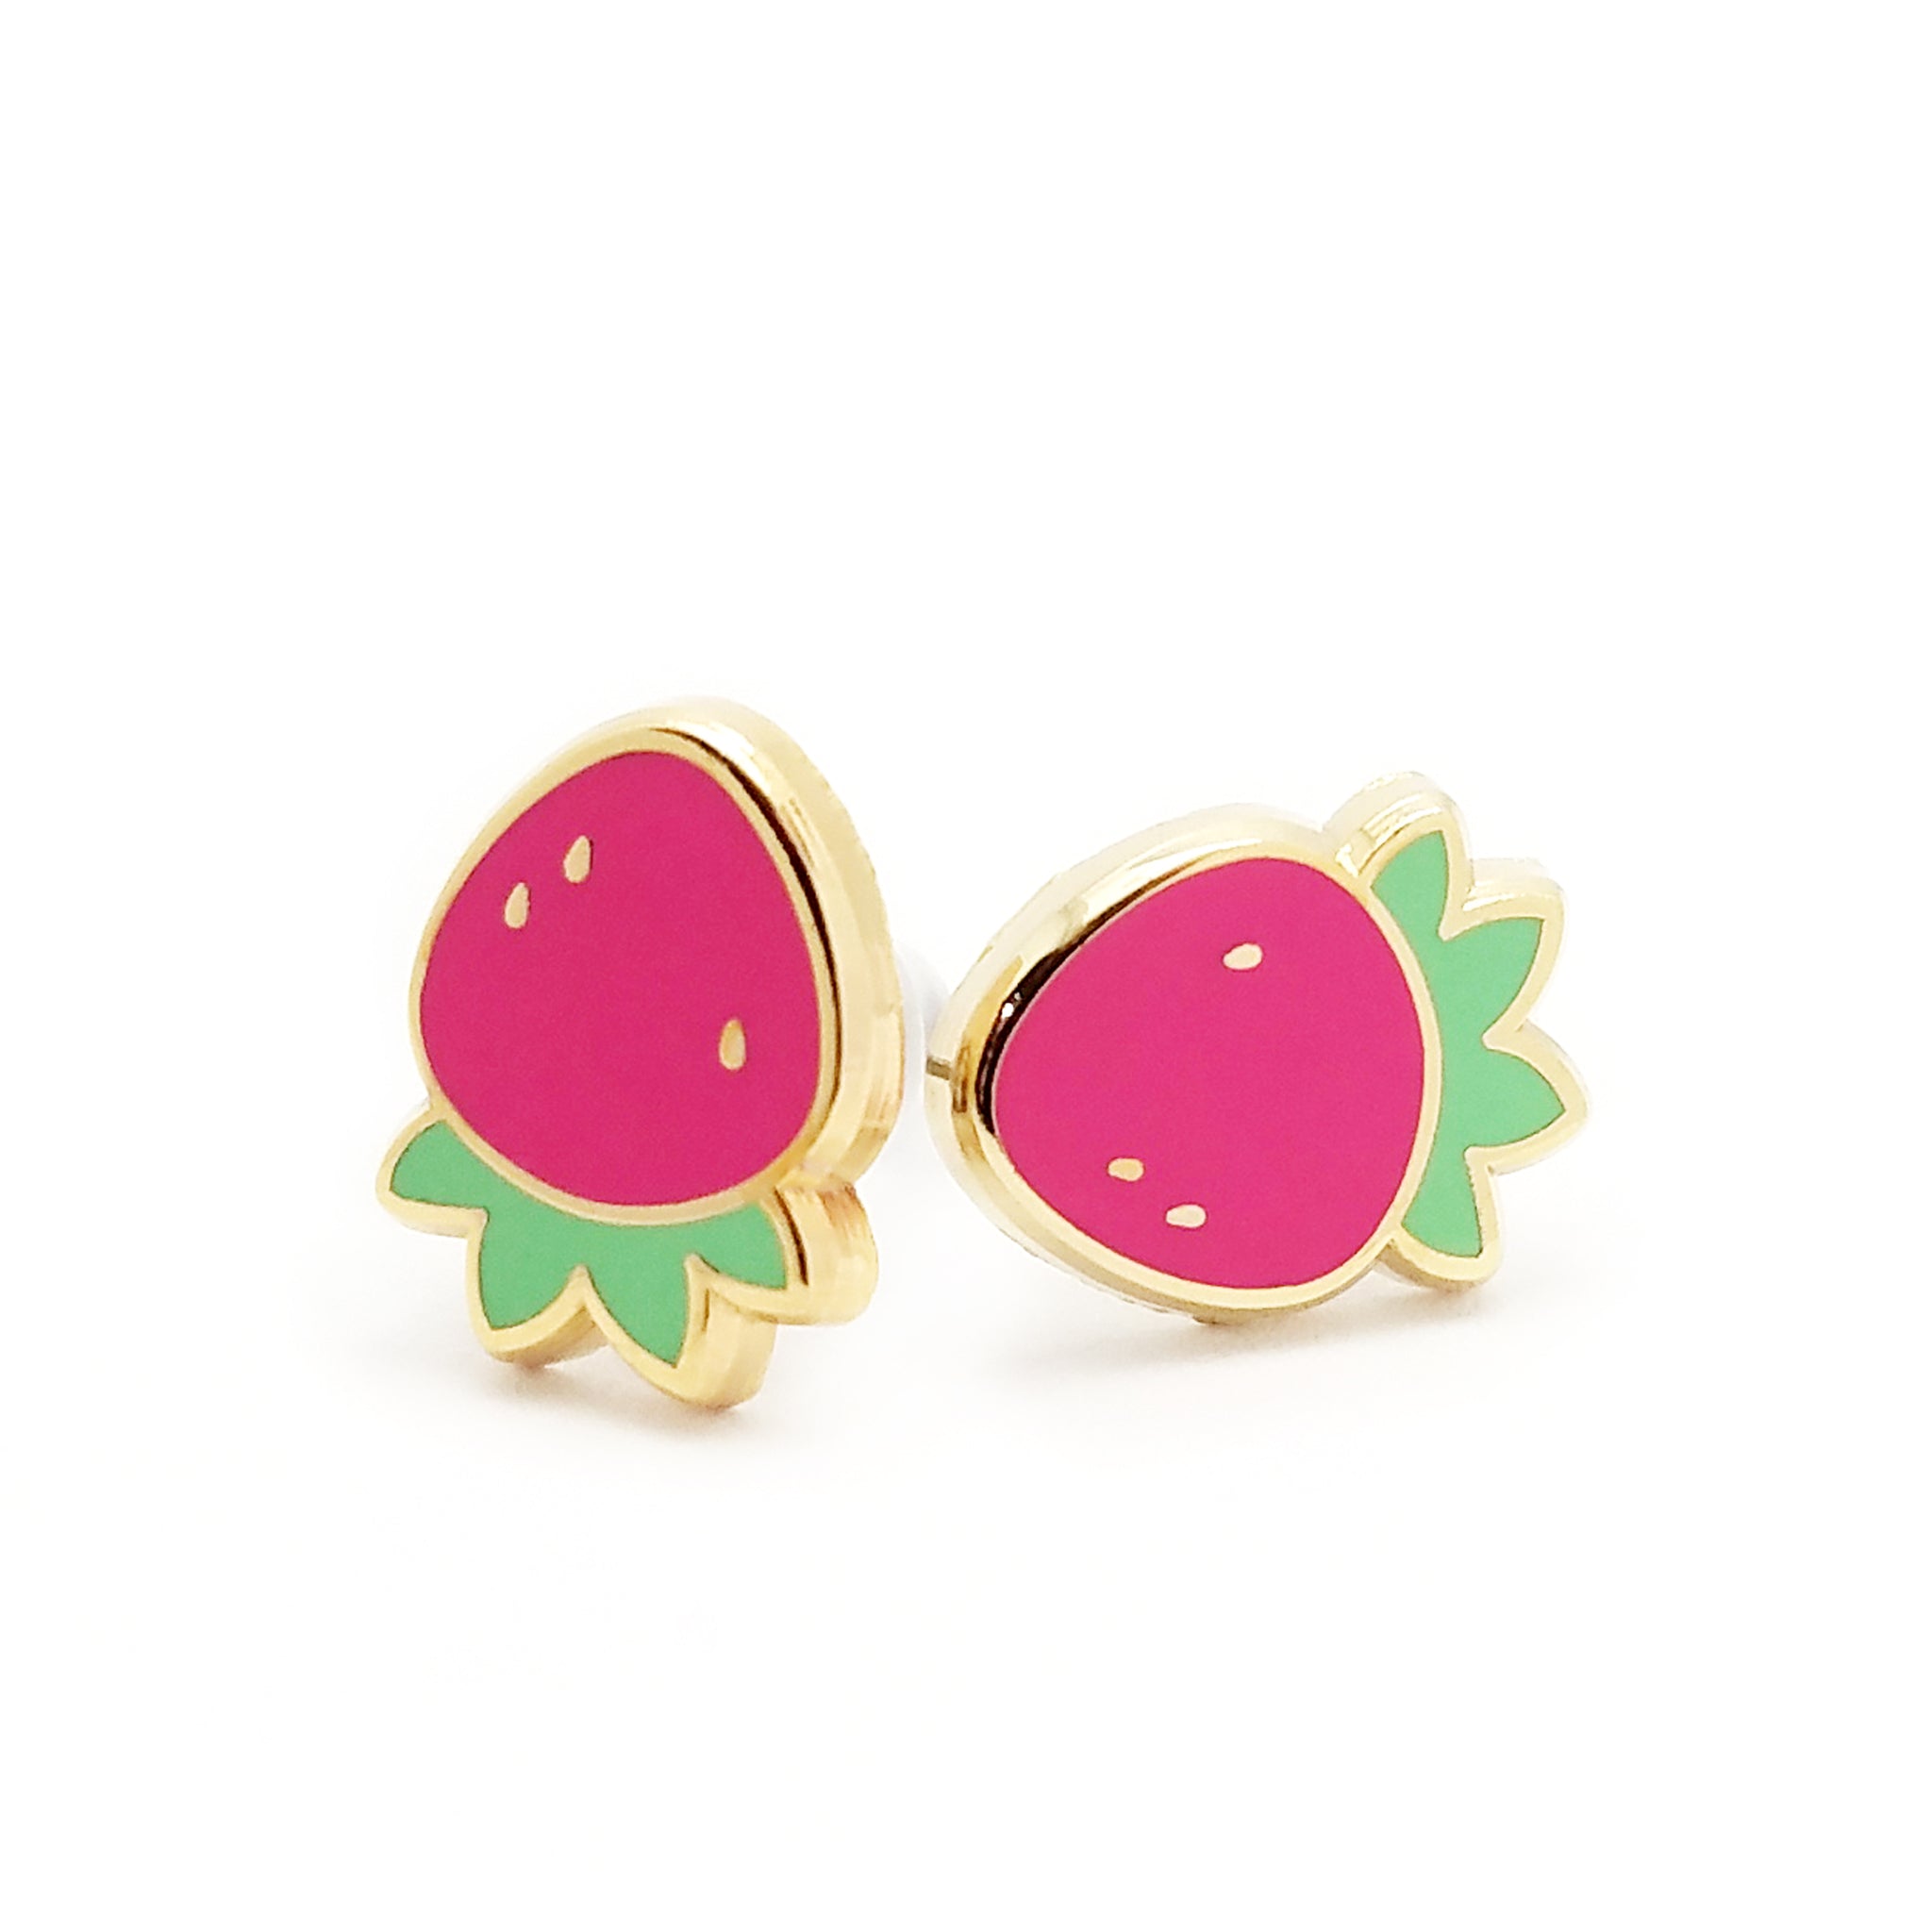 PINKY COSMETIC-PINKY STICKER EARRINGS(15Pairs)(03-PINKY) - Shop Comical  Kids Land Earrings & Clip-ons - Pinkoi